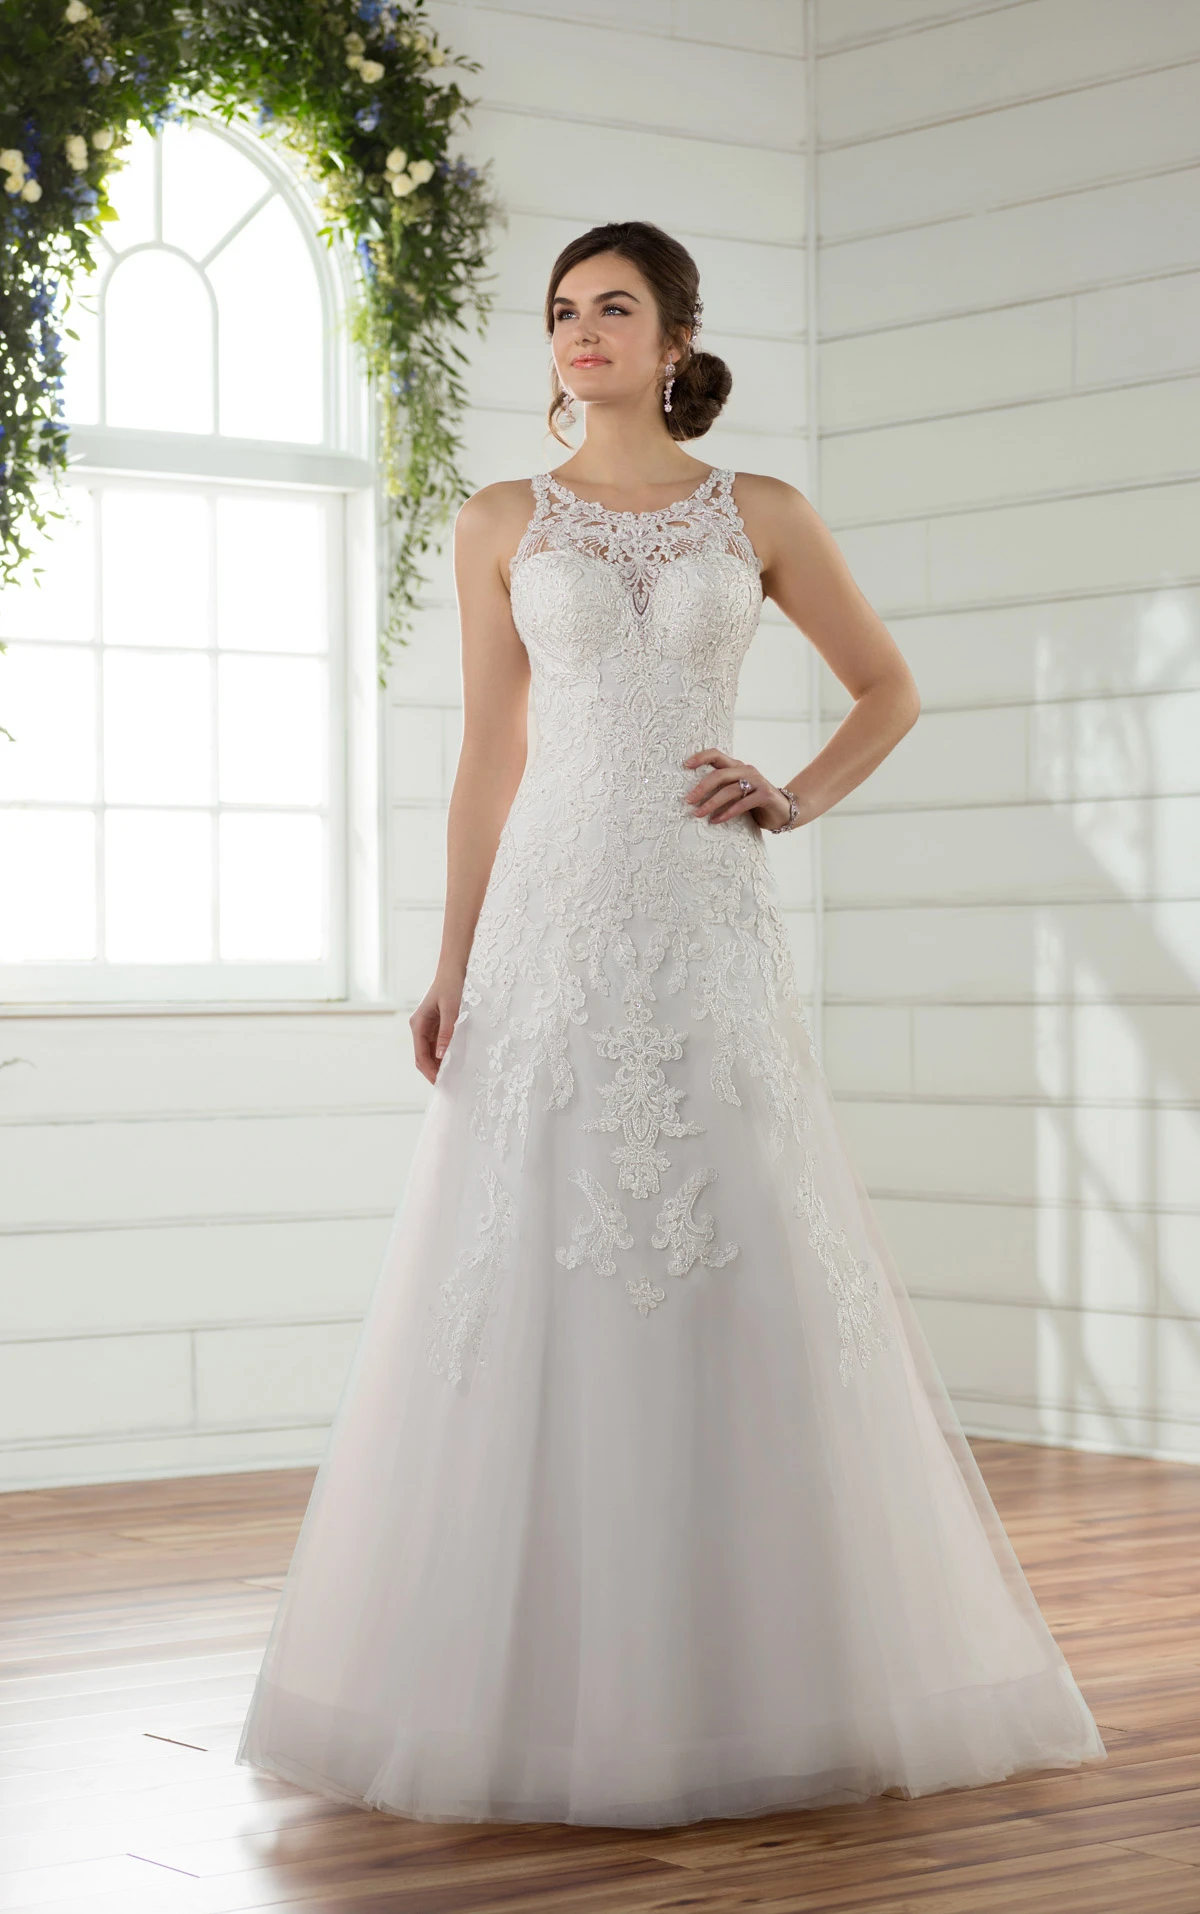 T212003 Romantic Embroidered Lace Strapless Wedding Dress with